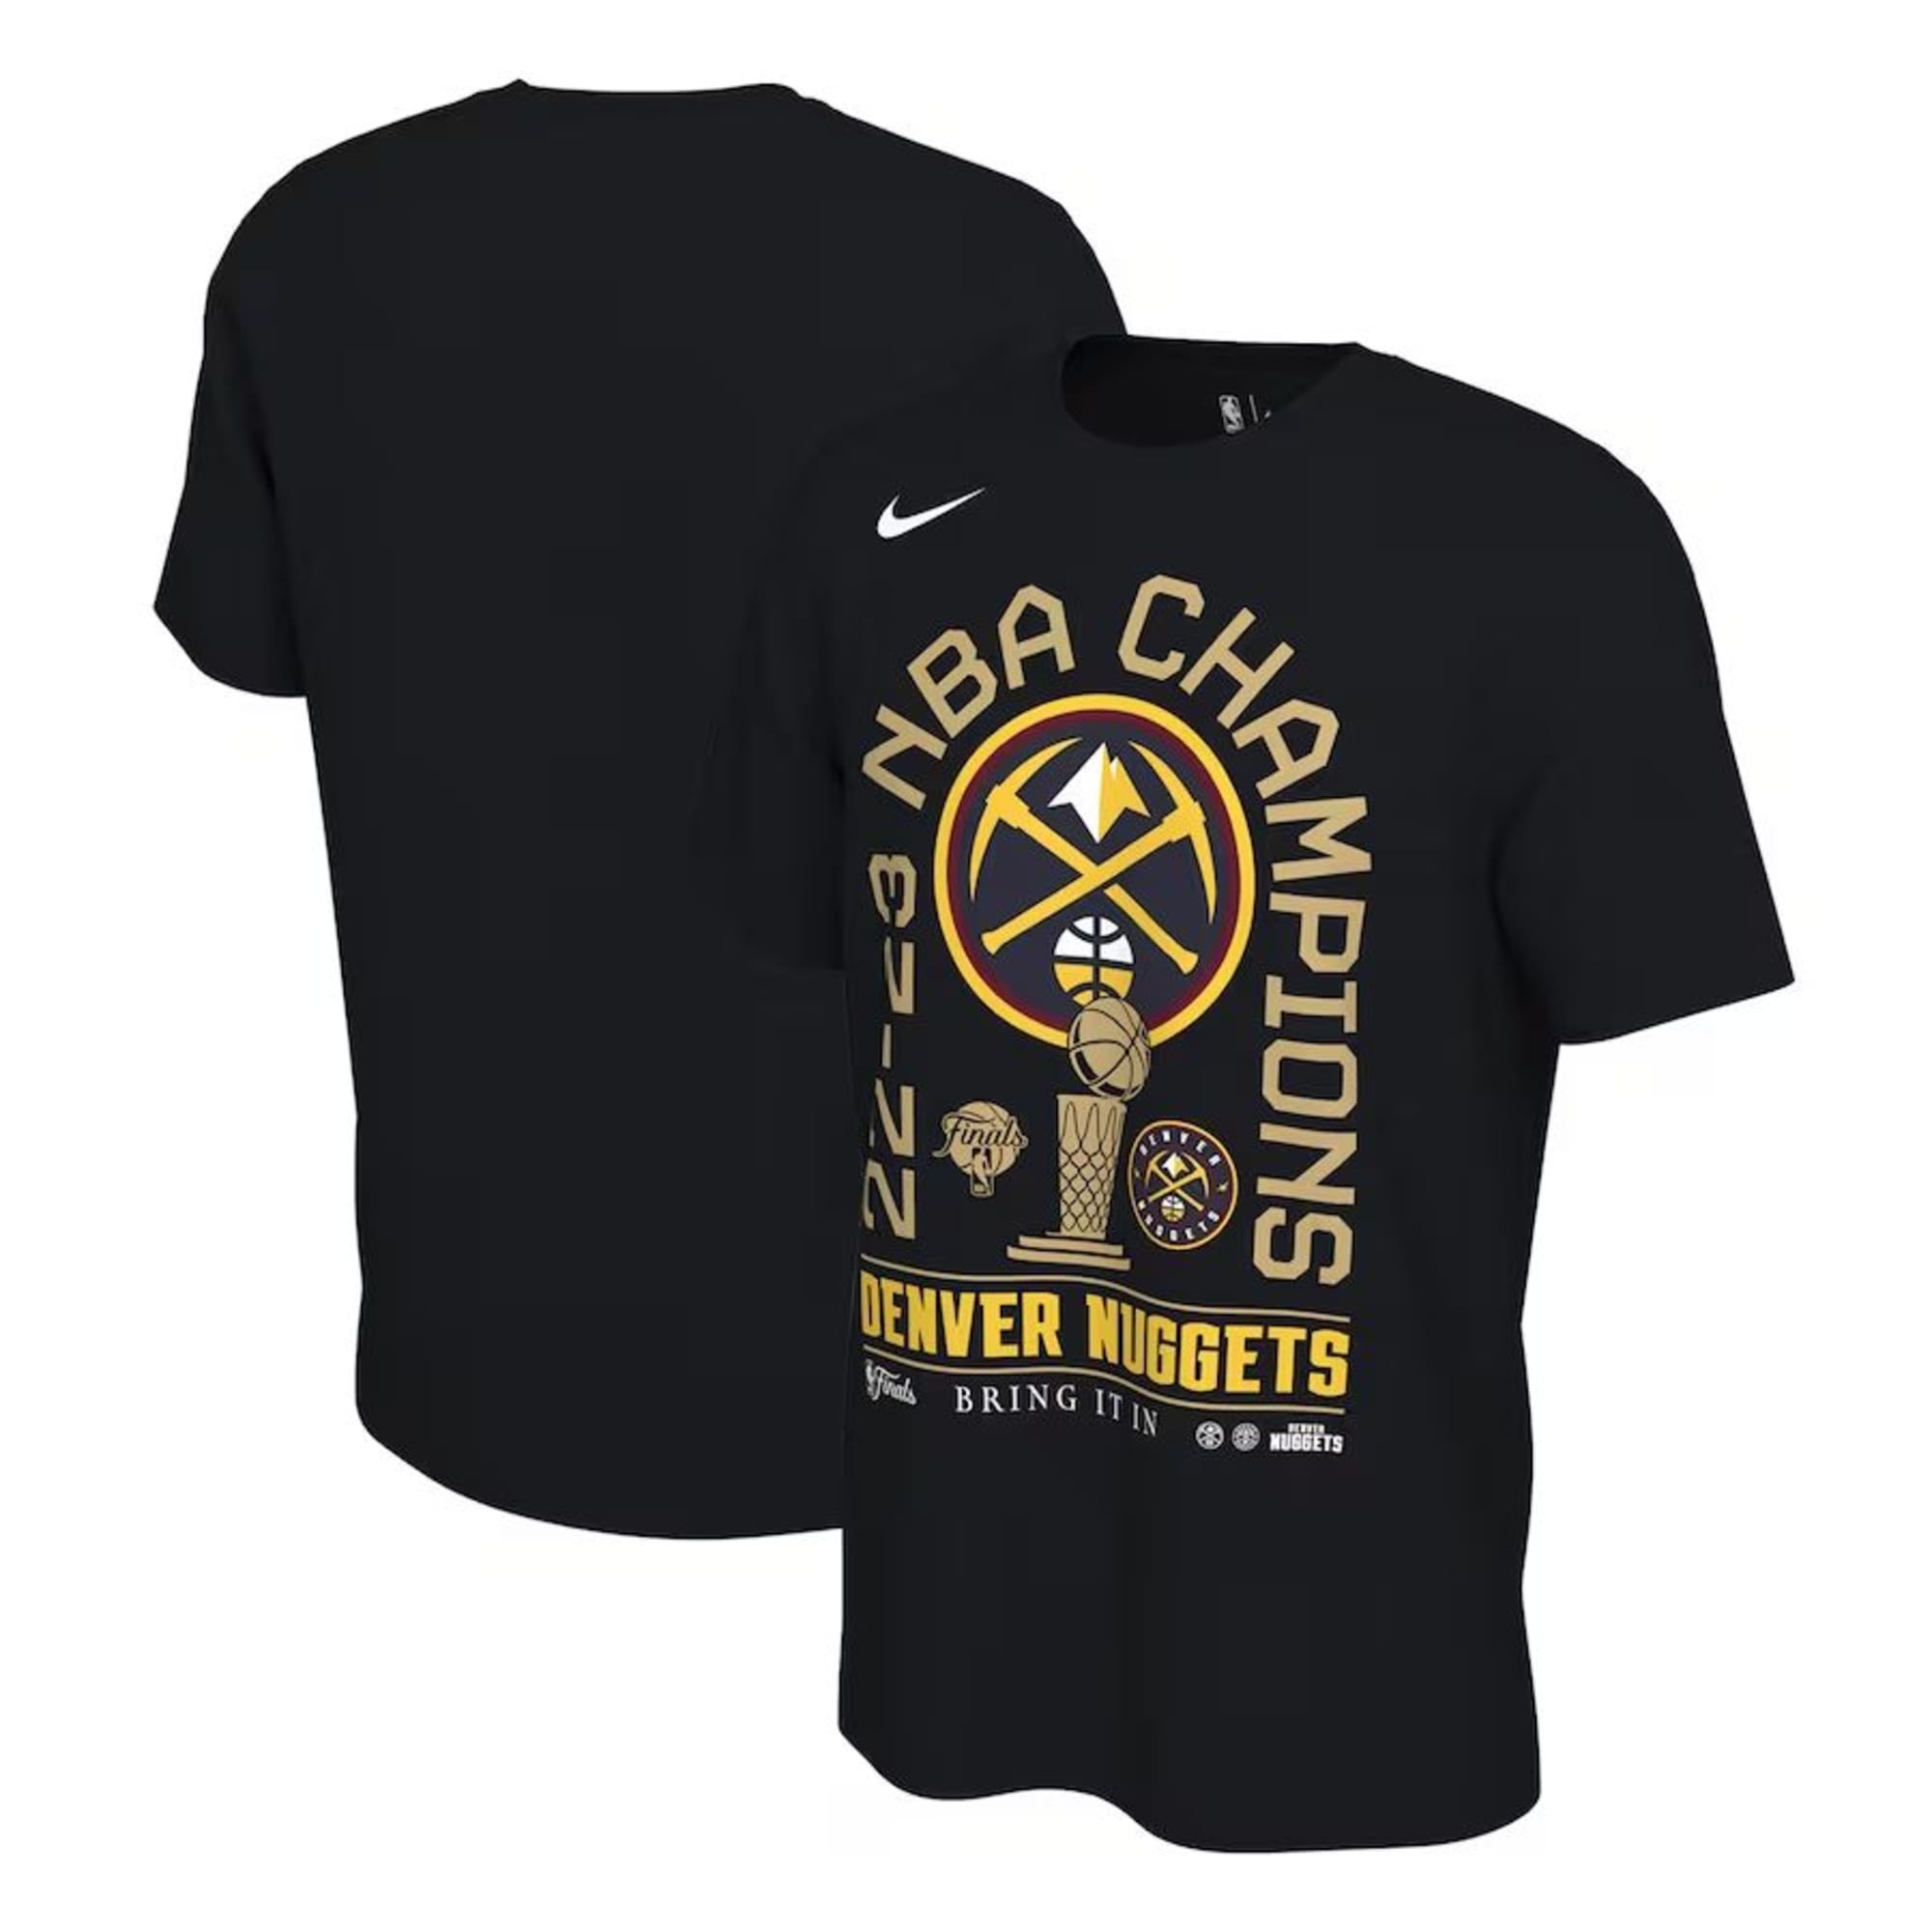 The Denver Nuggets are NBA Champions. Time to gear up.